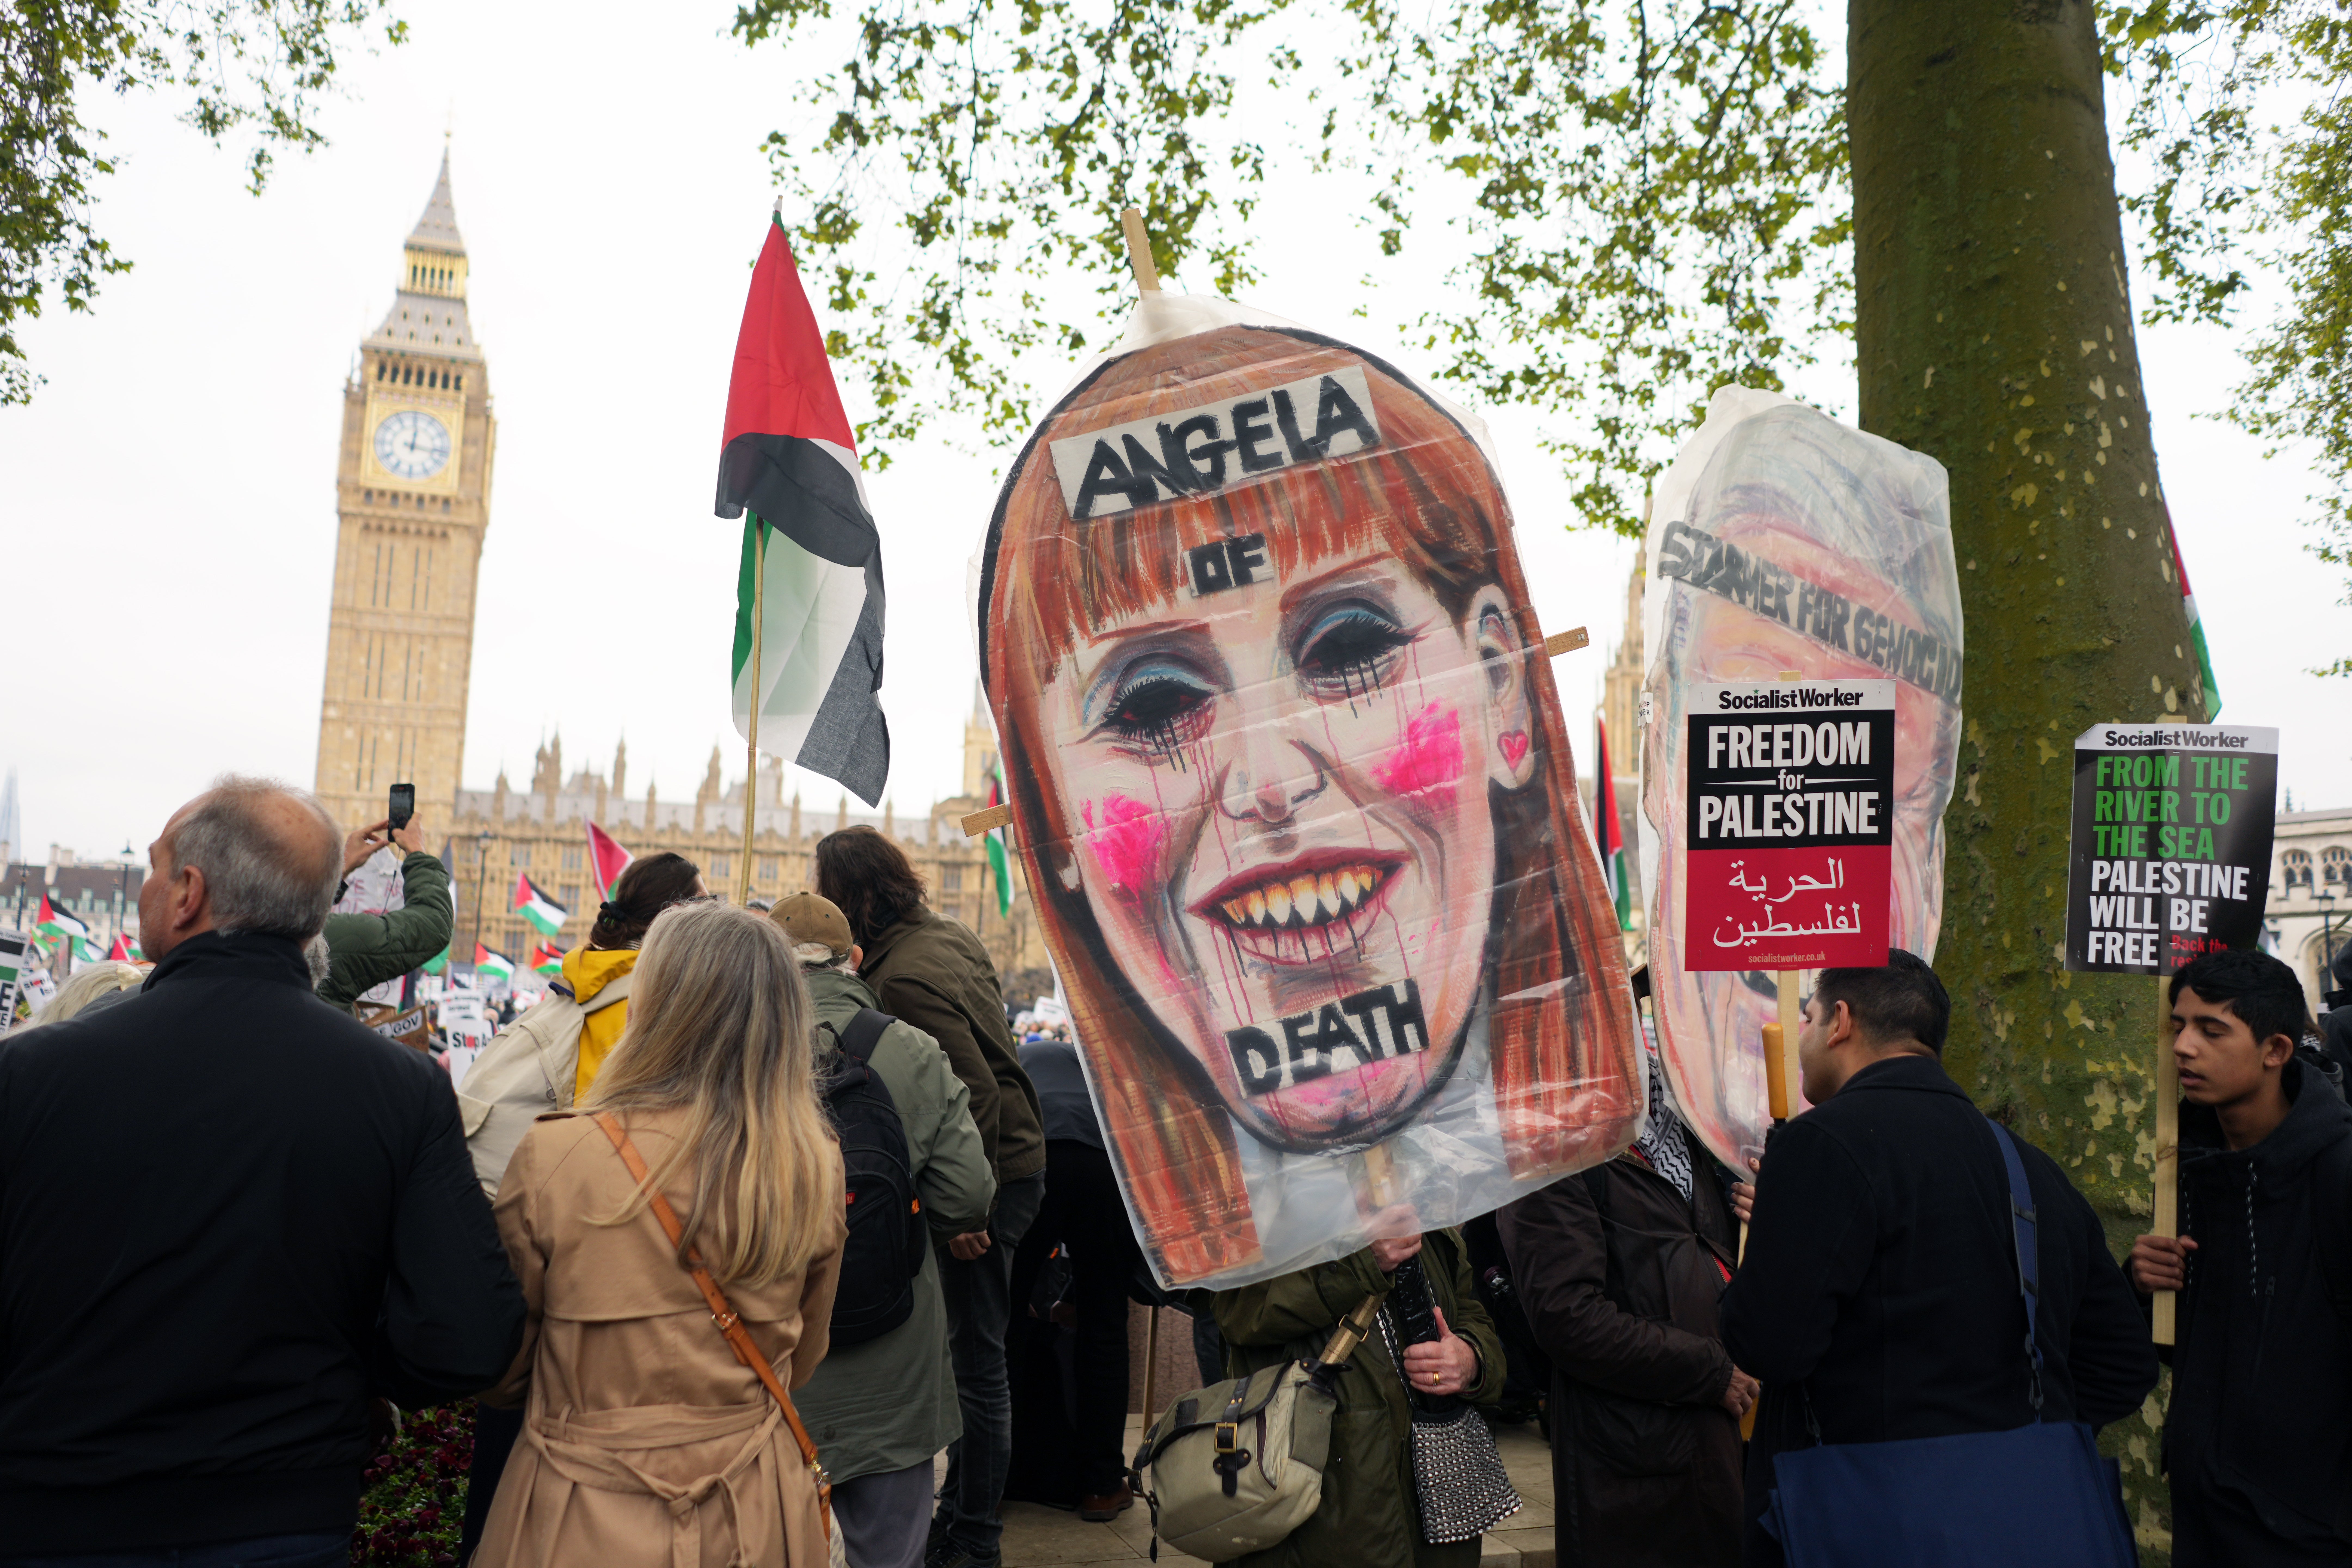 The Palestine Solidarity Campaign set off from Parliament Sqaure shortly before 1pm on Saturday